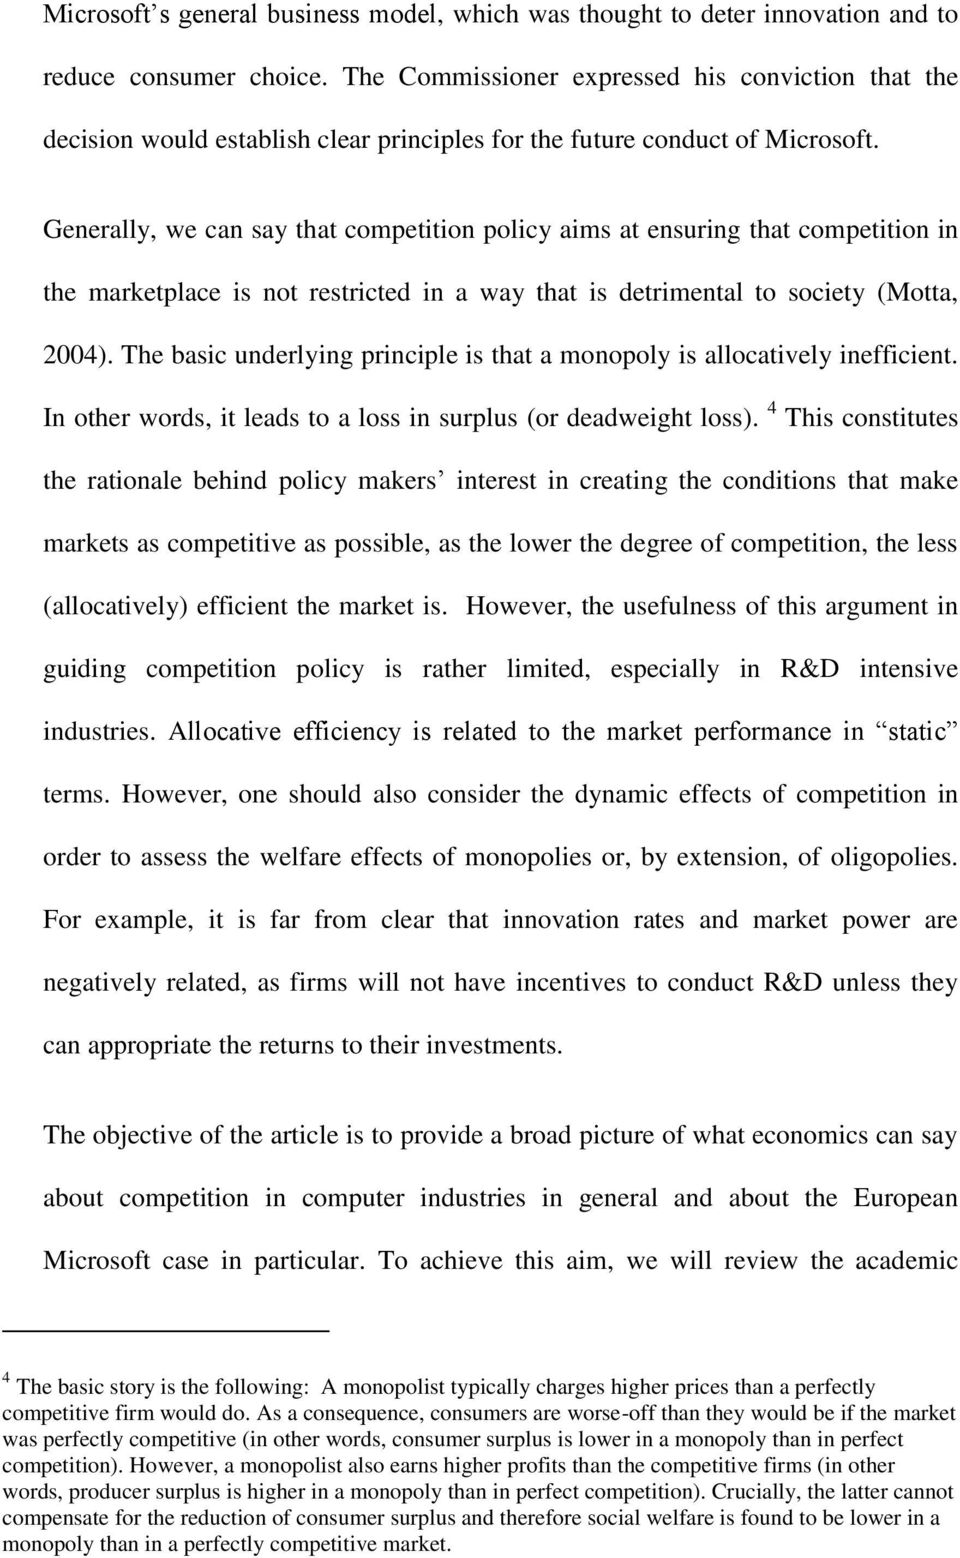 Generally, we can say that competition policy aims at ensuring that competition in the marketplace is not restricted in a way that is detrimental to society (Motta, 2004).